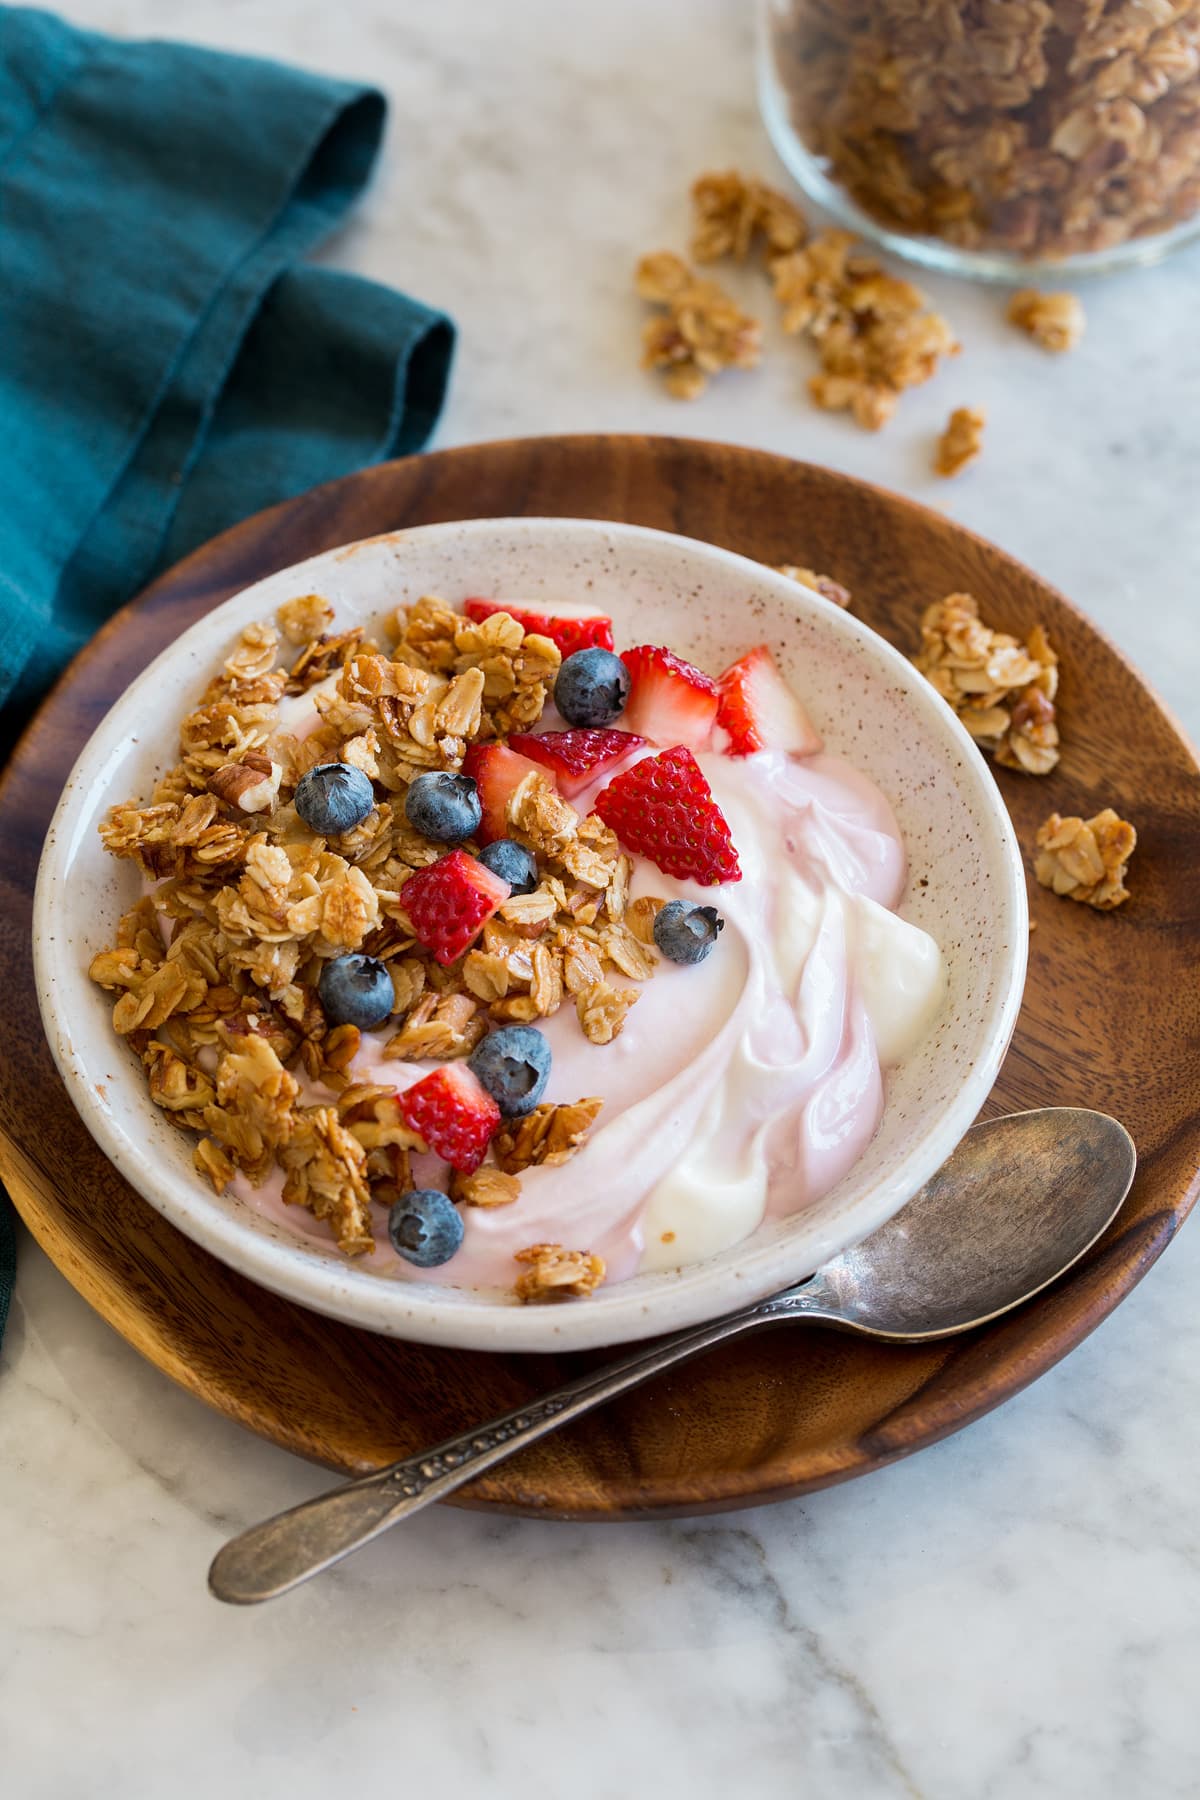 Homemade granola shown in a small serving bowl served over yogurt and fruit.